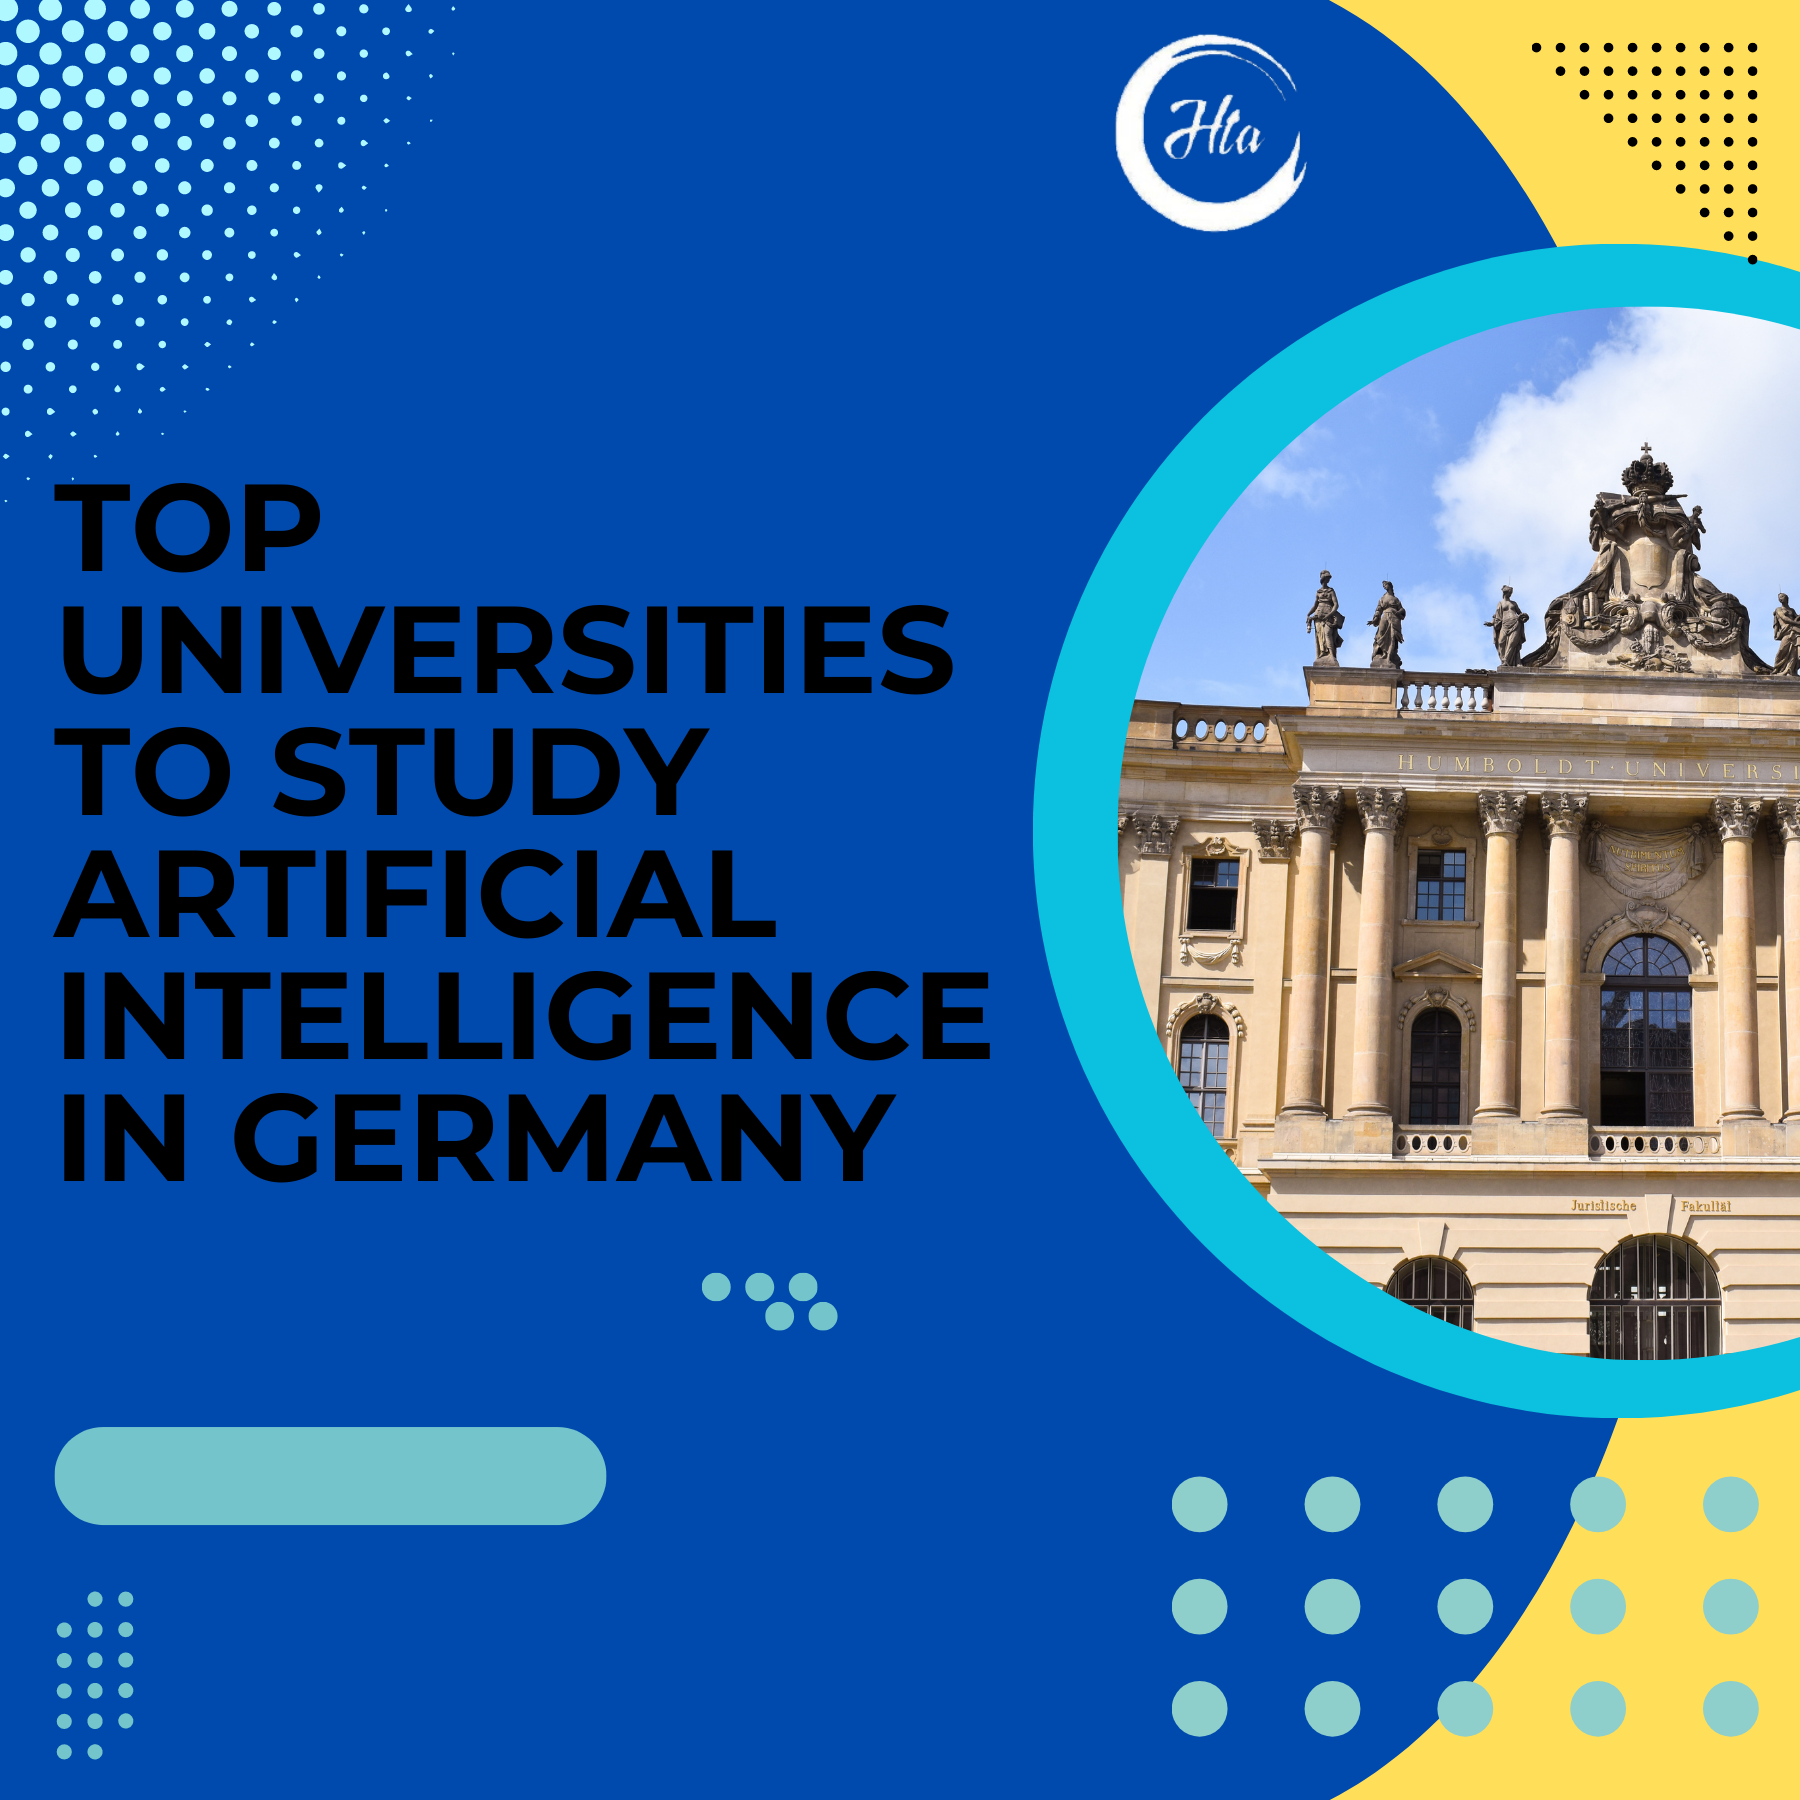 Top Universities to study Artificial Intelligence in Germany